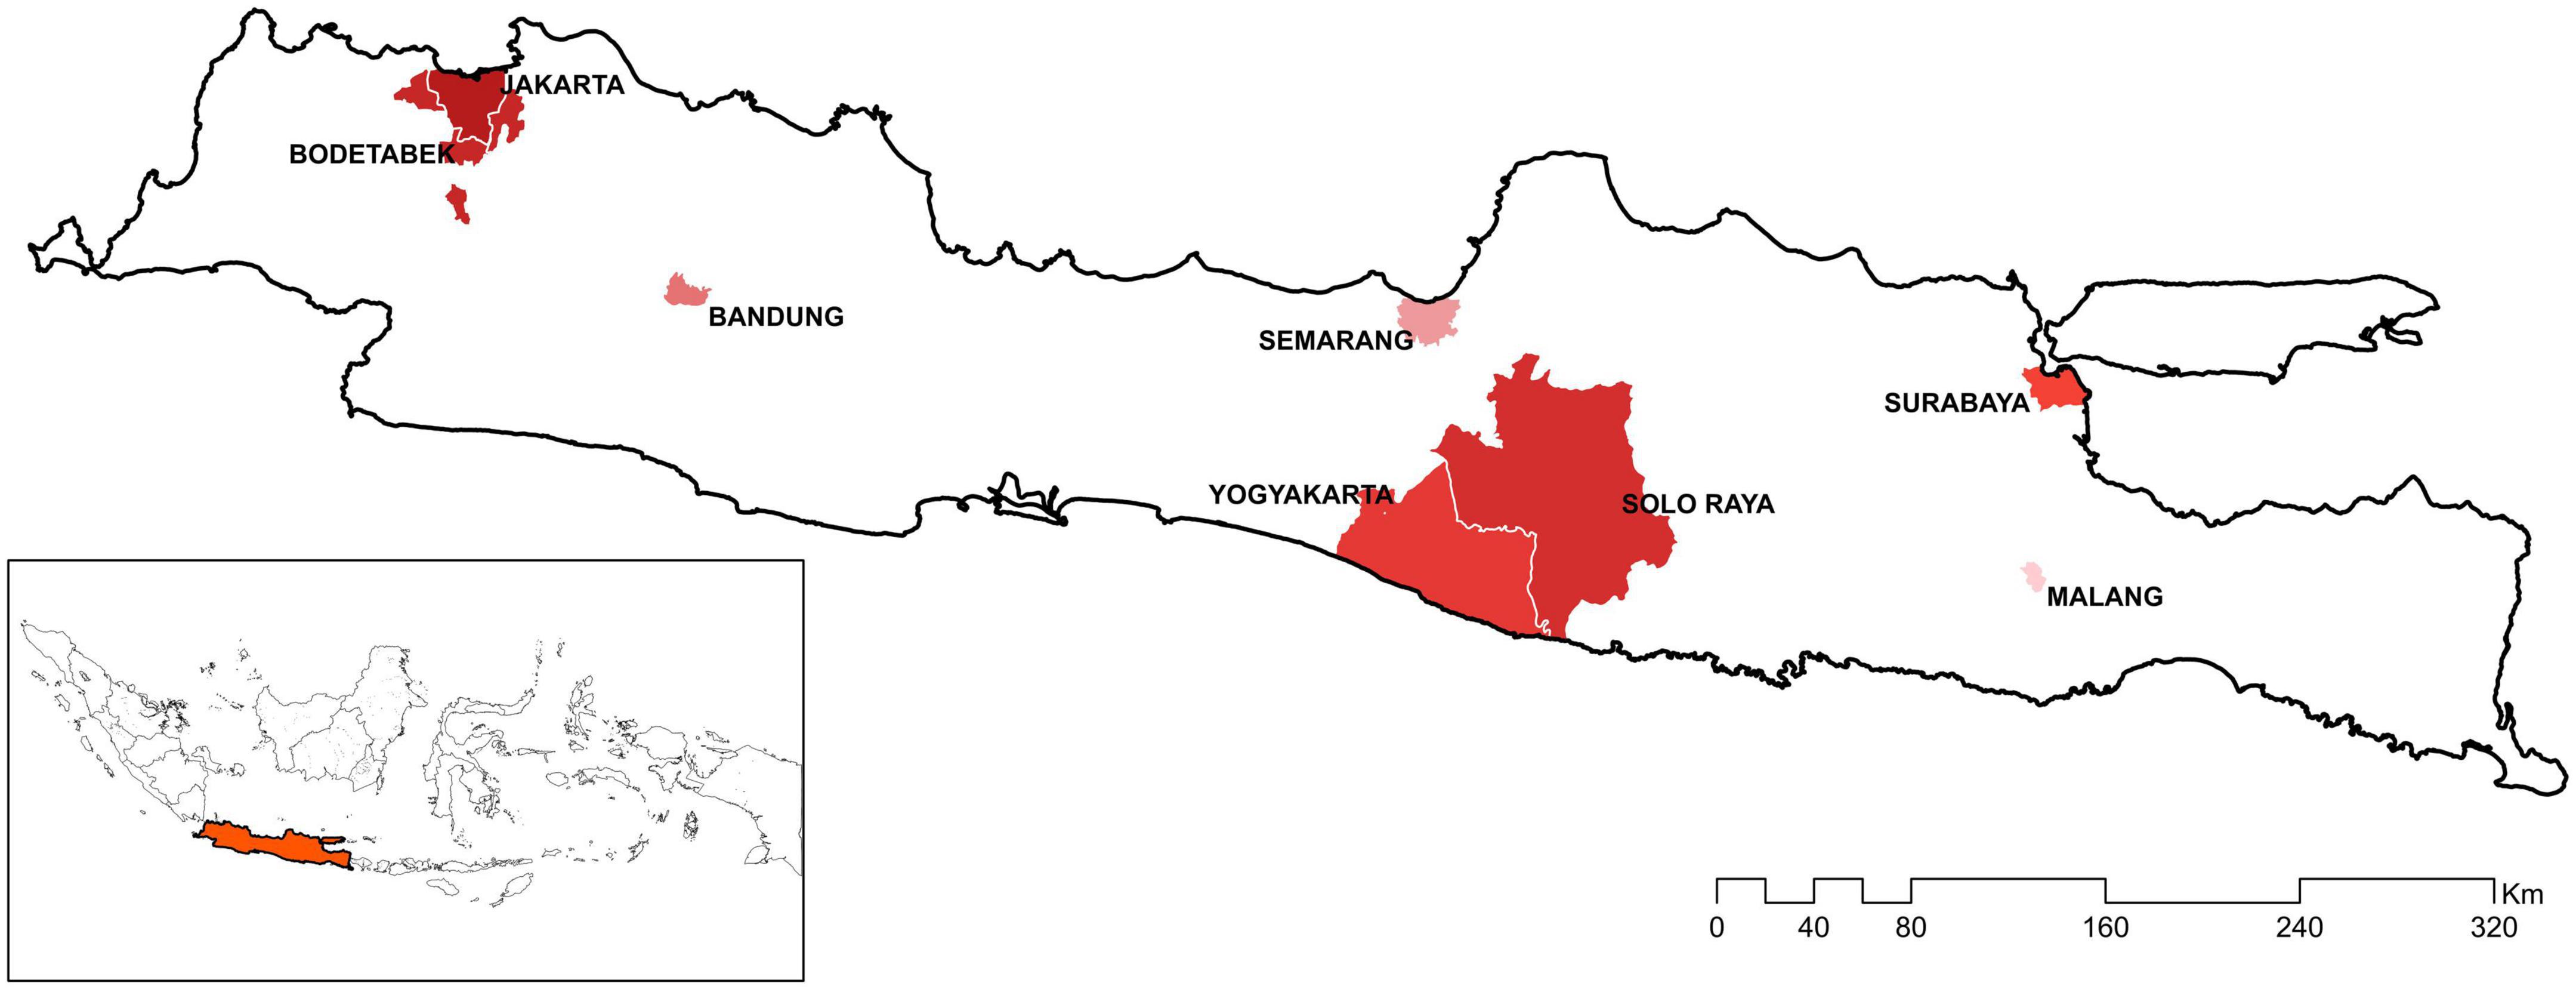 Modeling social interaction and metapopulation mobility of the COVID-19 pandemic in main cities of highly populated Java Island, Indonesia: An agent-based modeling approach